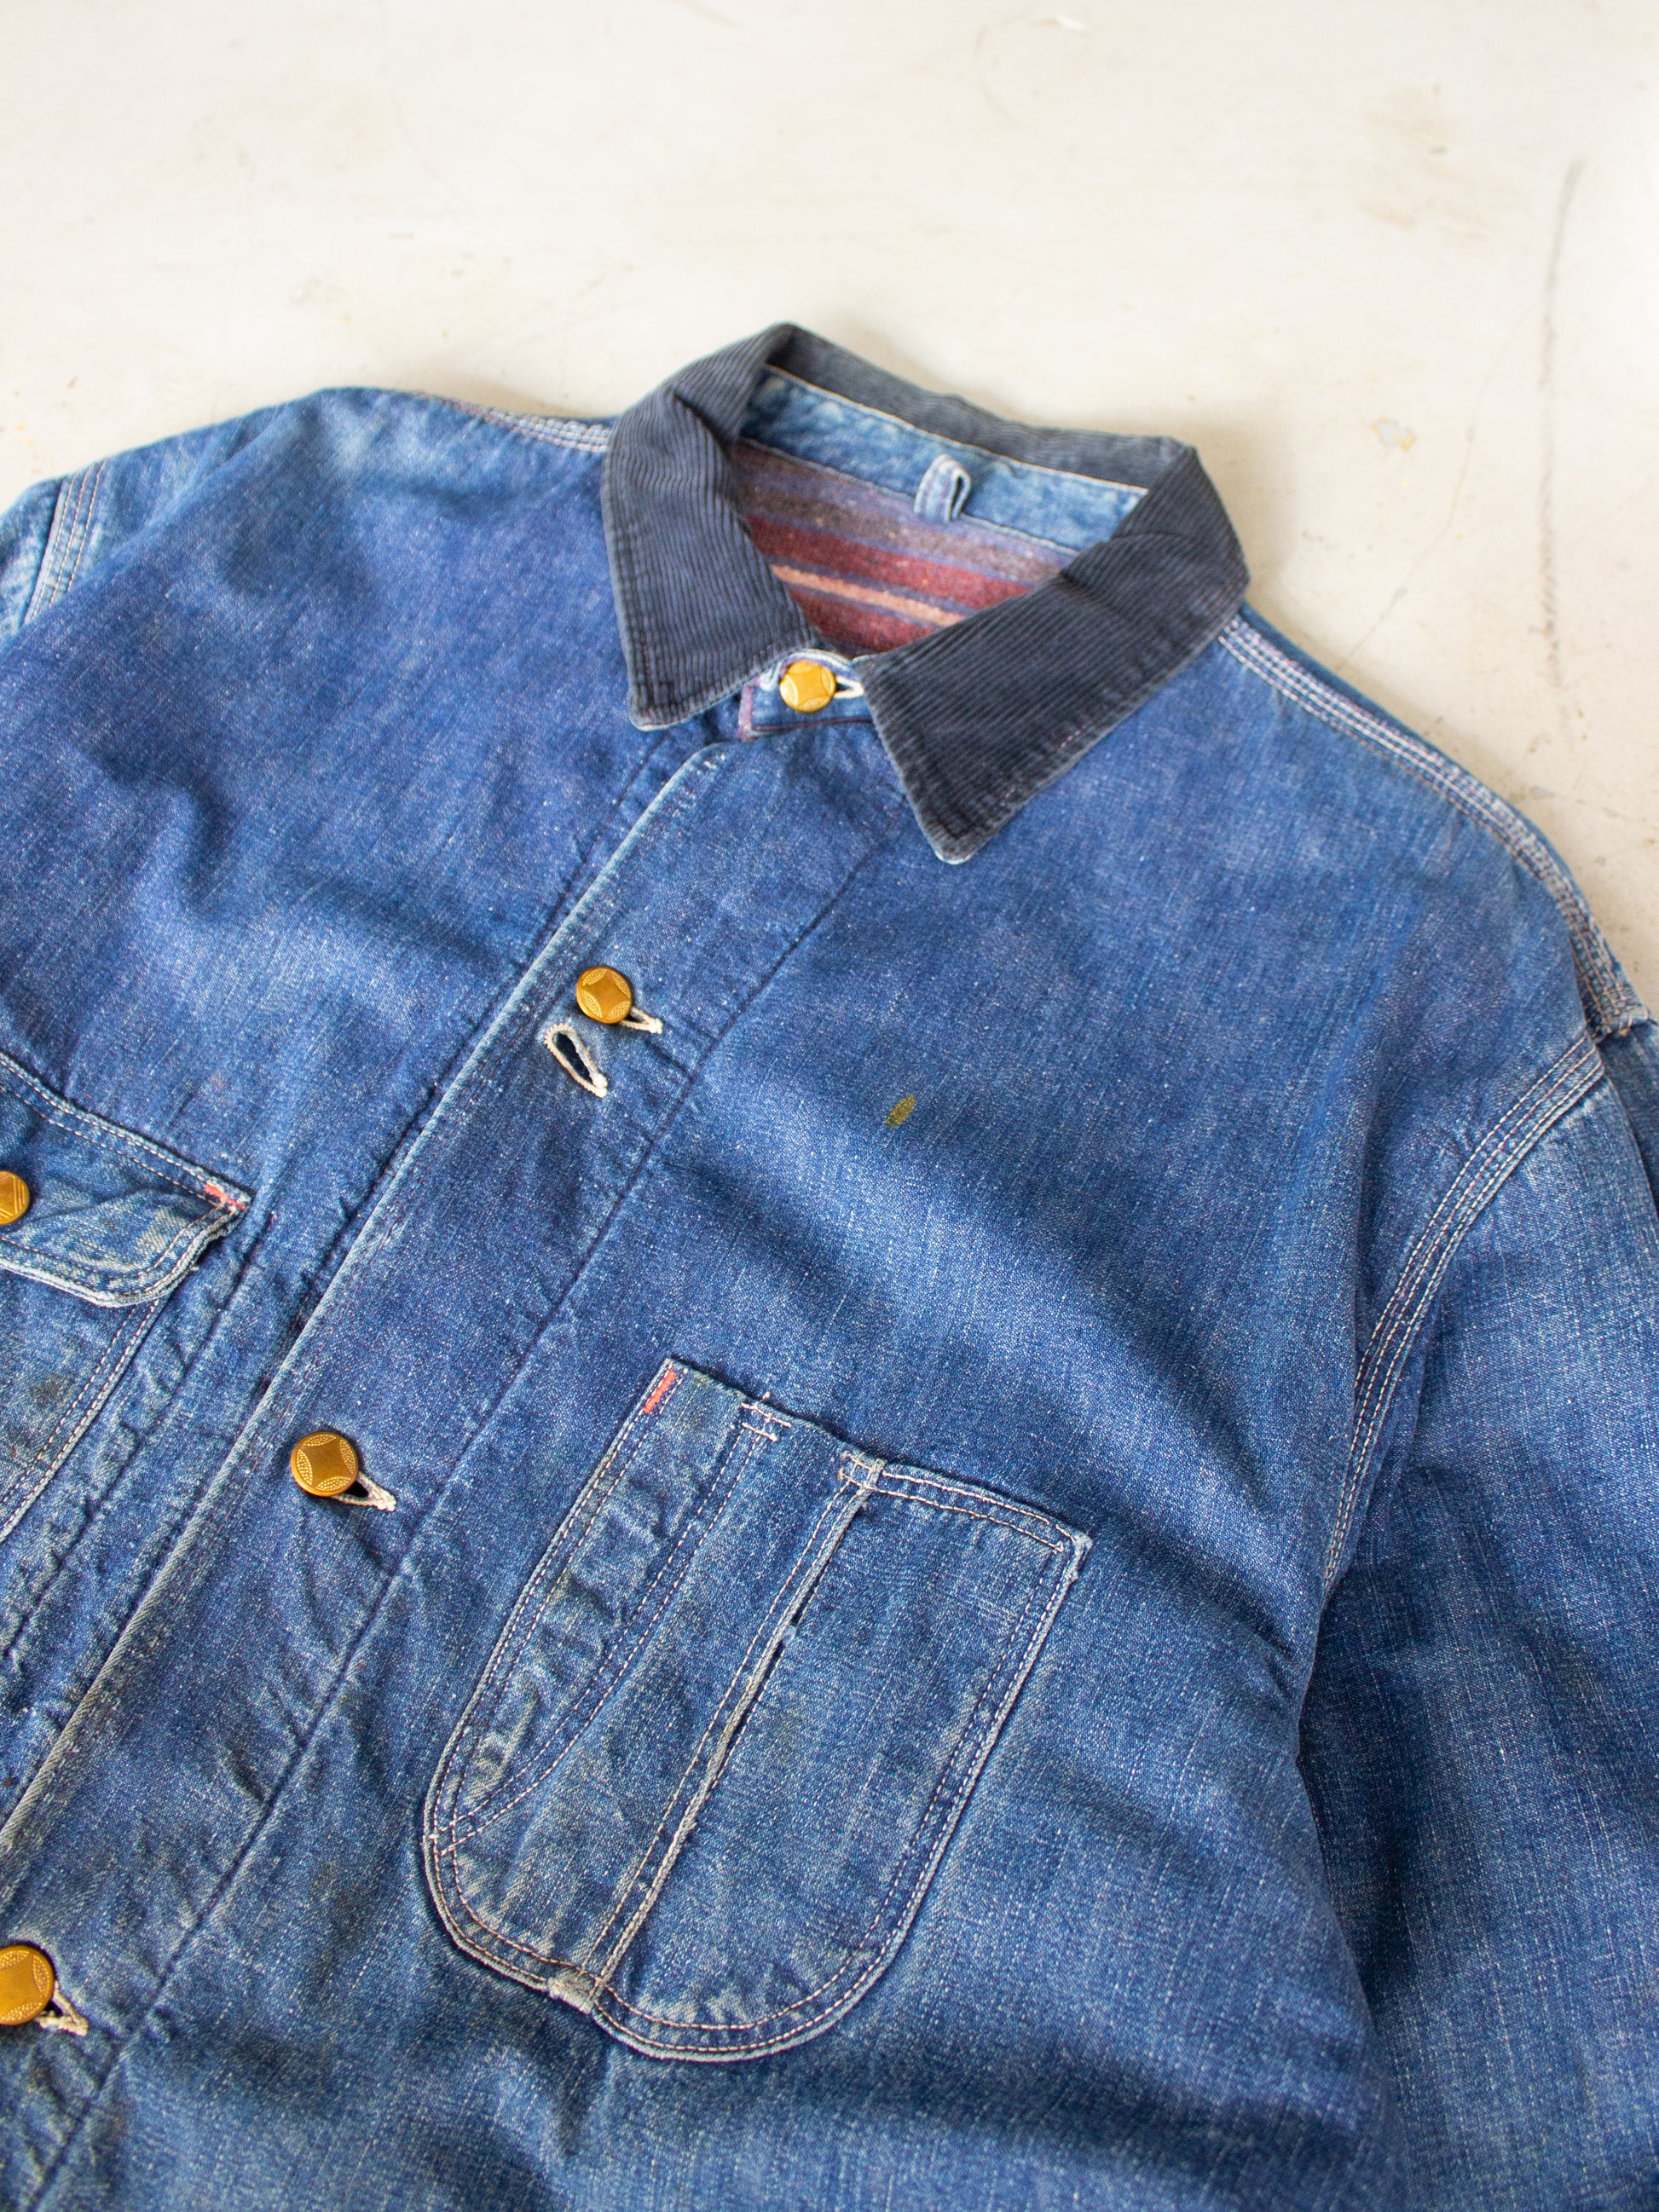 Vintage Blanket Lined Chore Denim Jacket with Striped Wool Lining